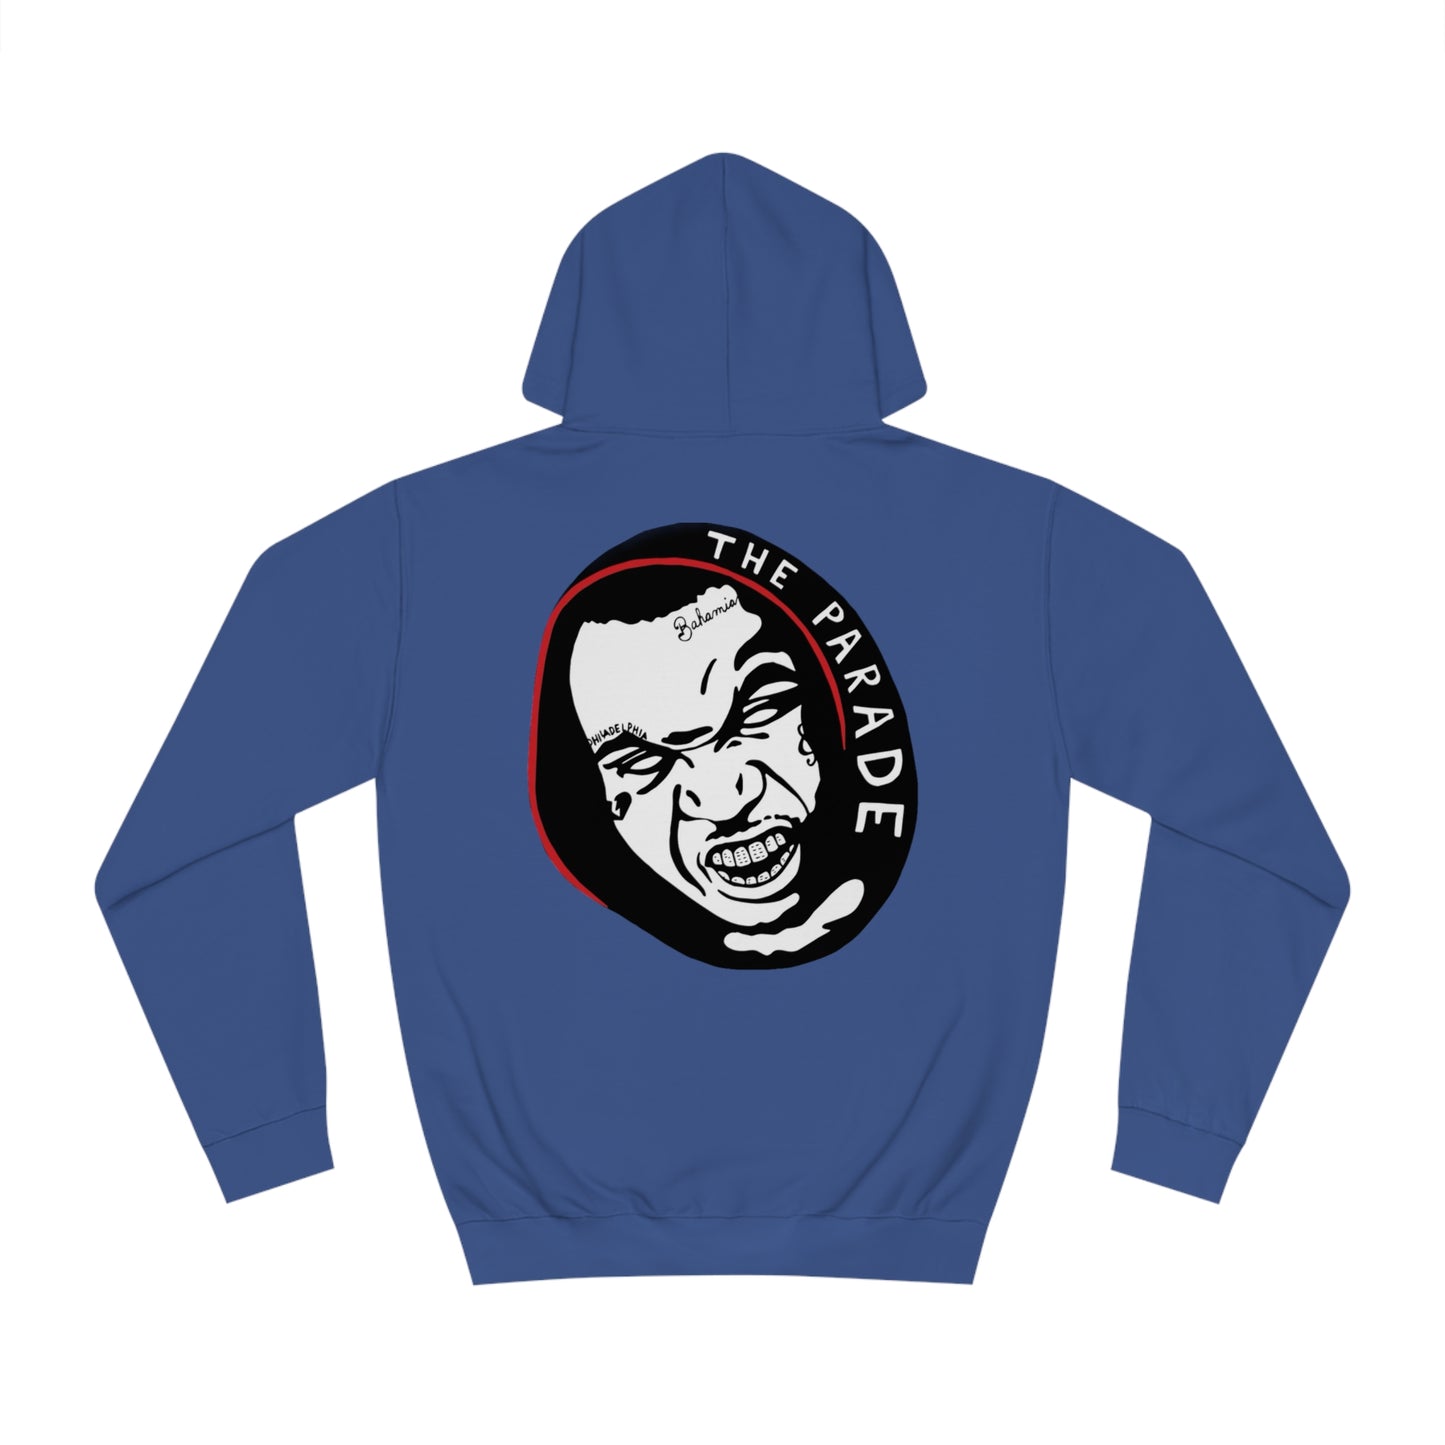 Philly Swain by Philly Swain Hoodie